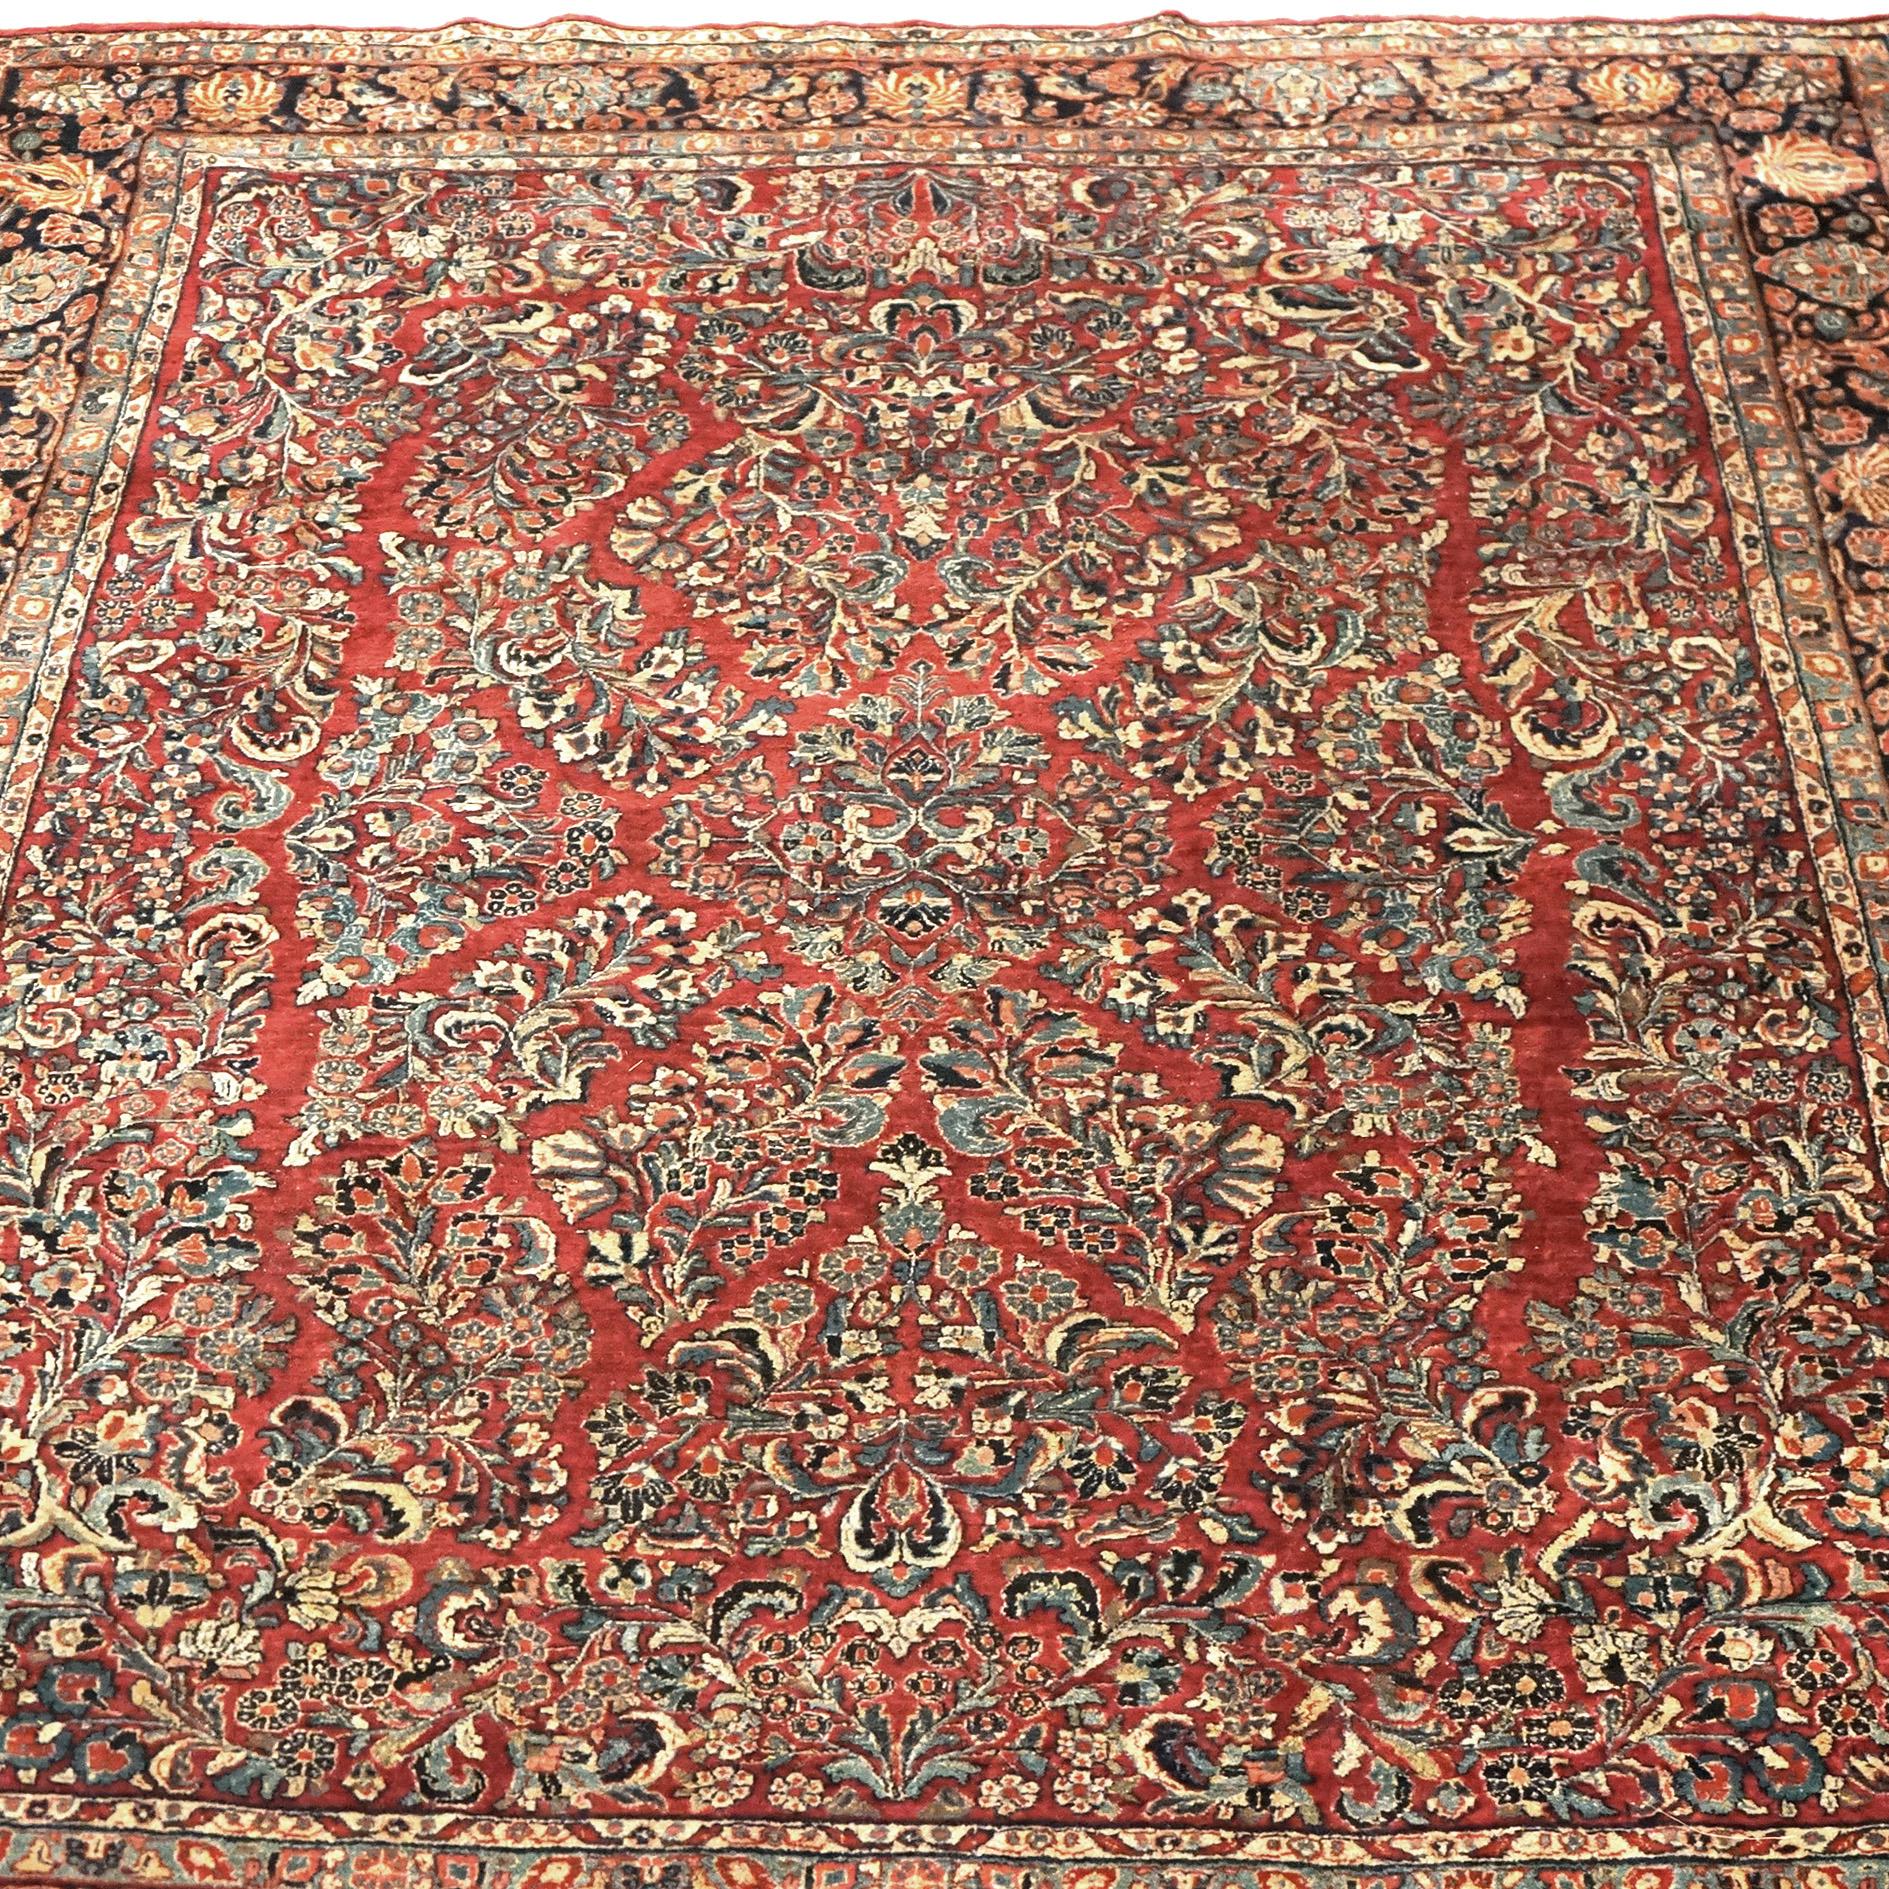 Antique Sarouk Persian Oriental 9x12 Wool Rug C1930 In Good Condition For Sale In Big Flats, NY